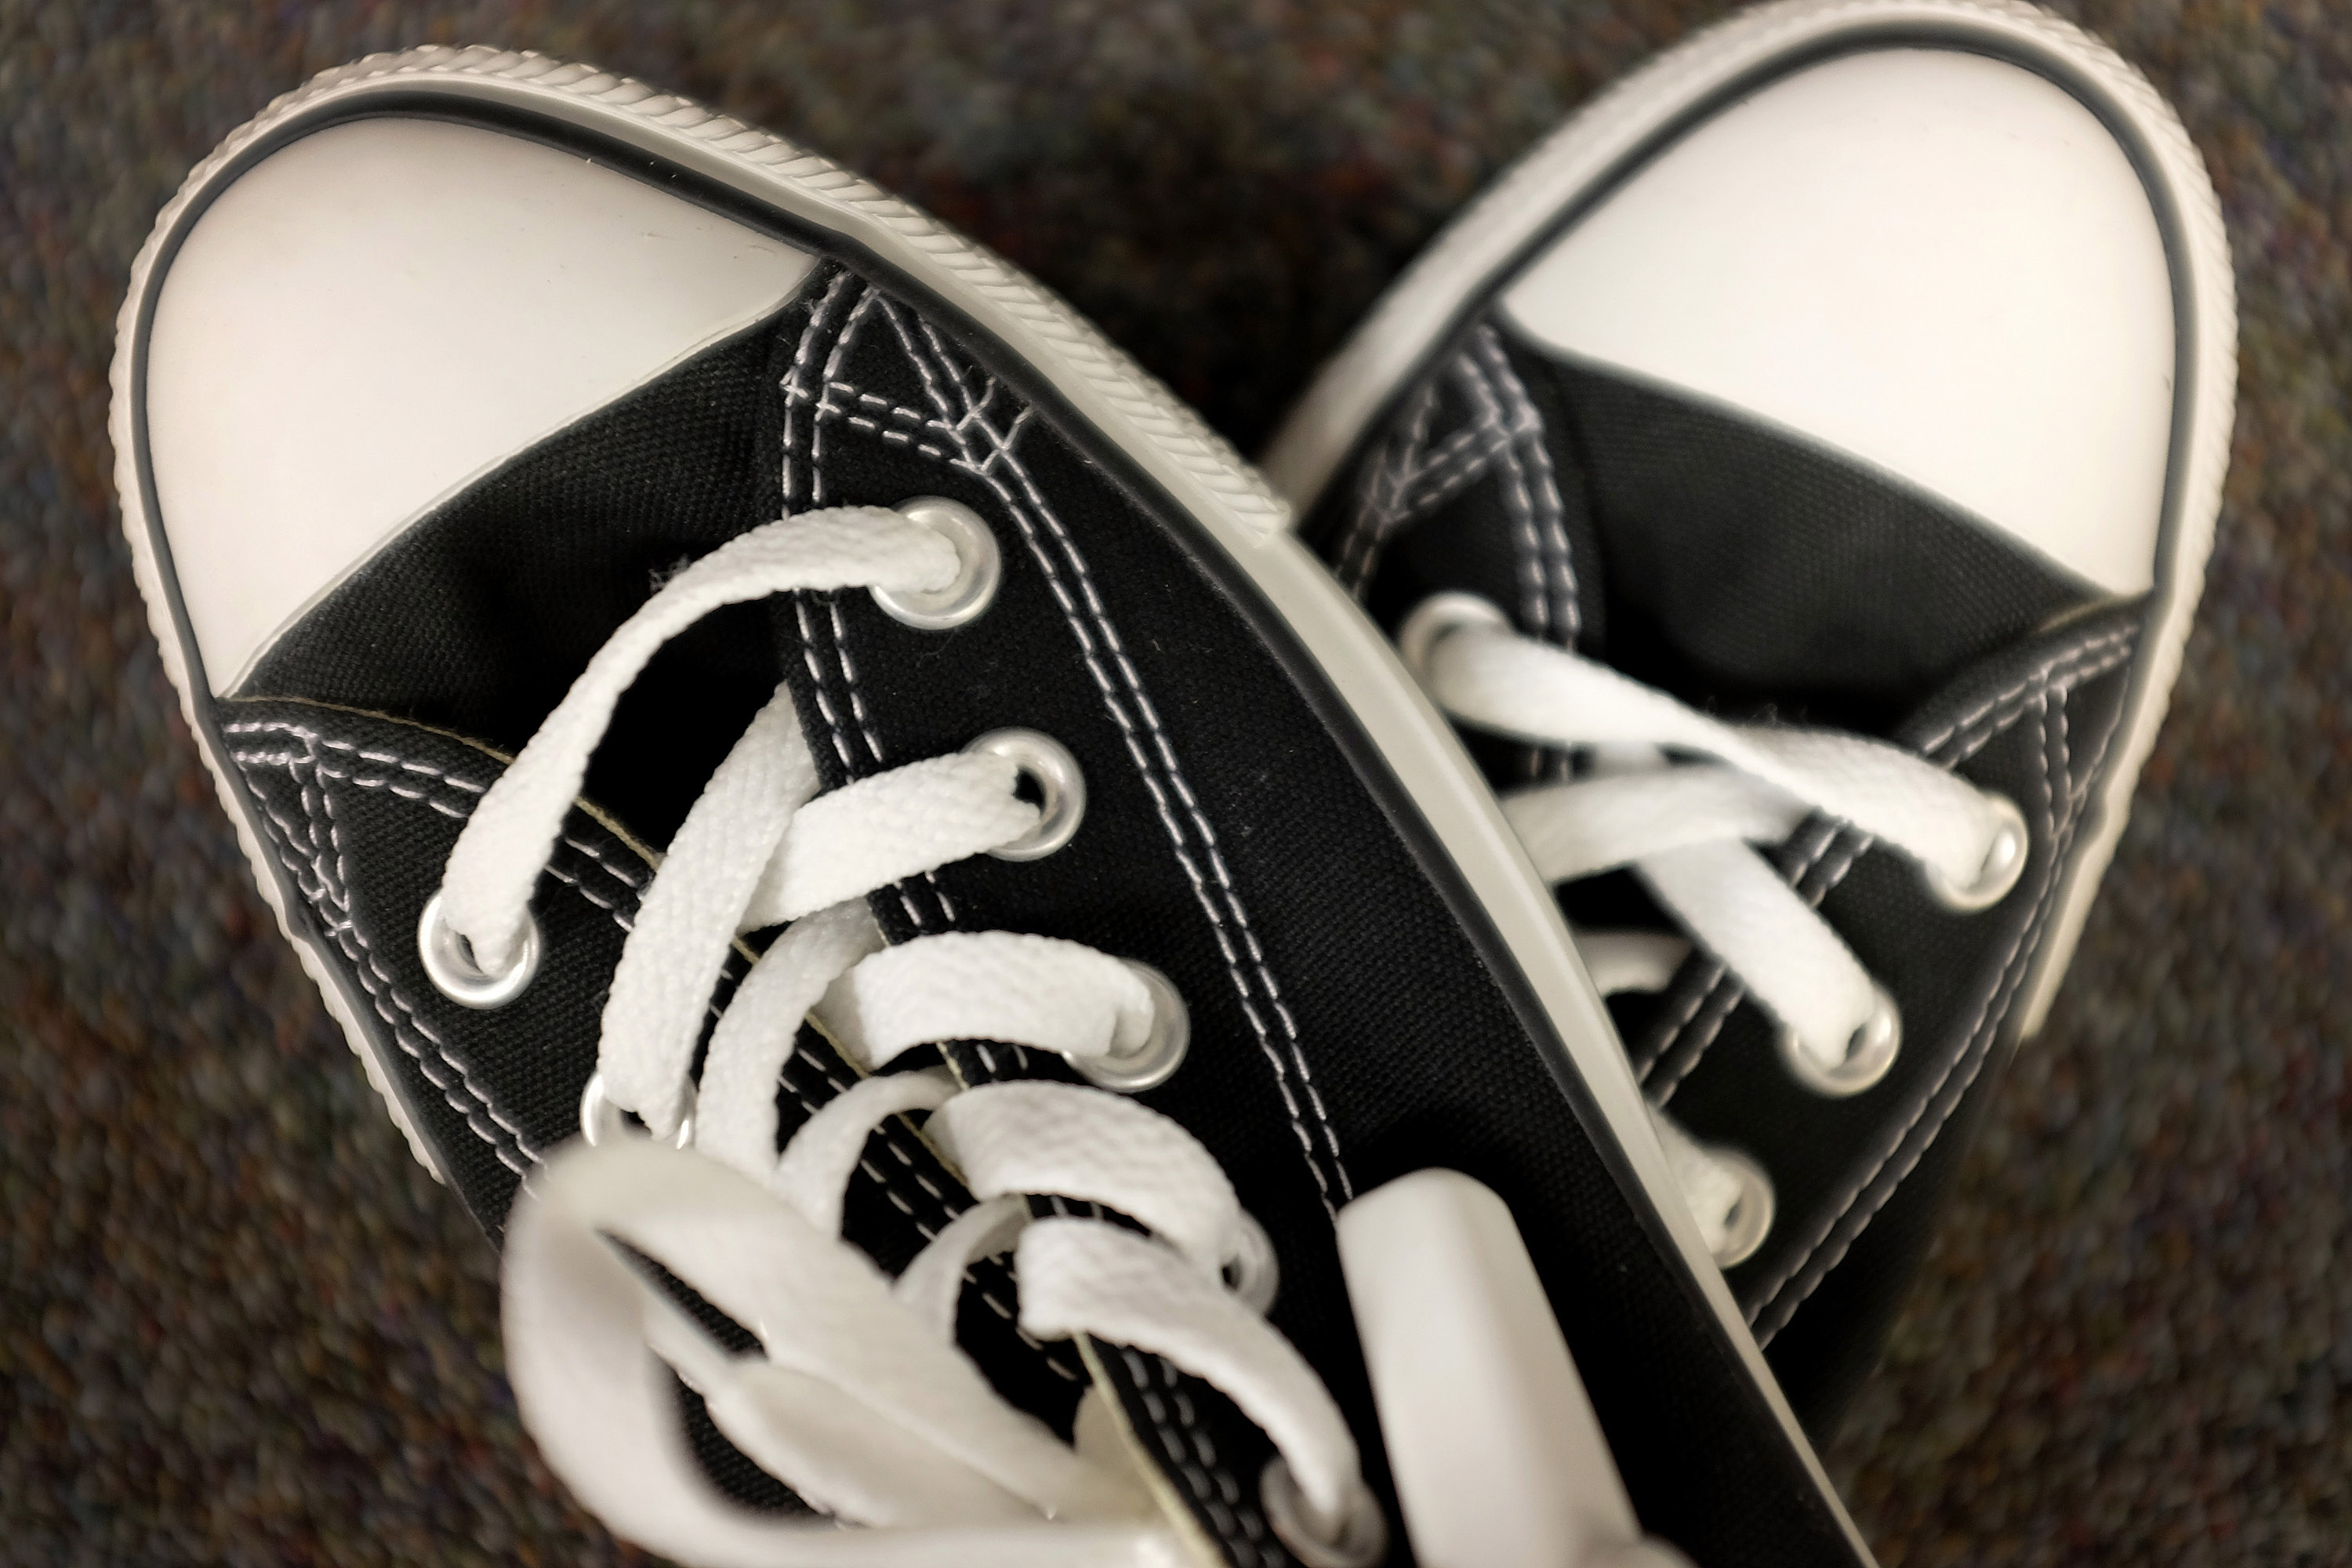 Converse shoes are seen in a store on October 14, 2014 in Miami, Florida. (Joe Raedle&mdash;Getty Images)